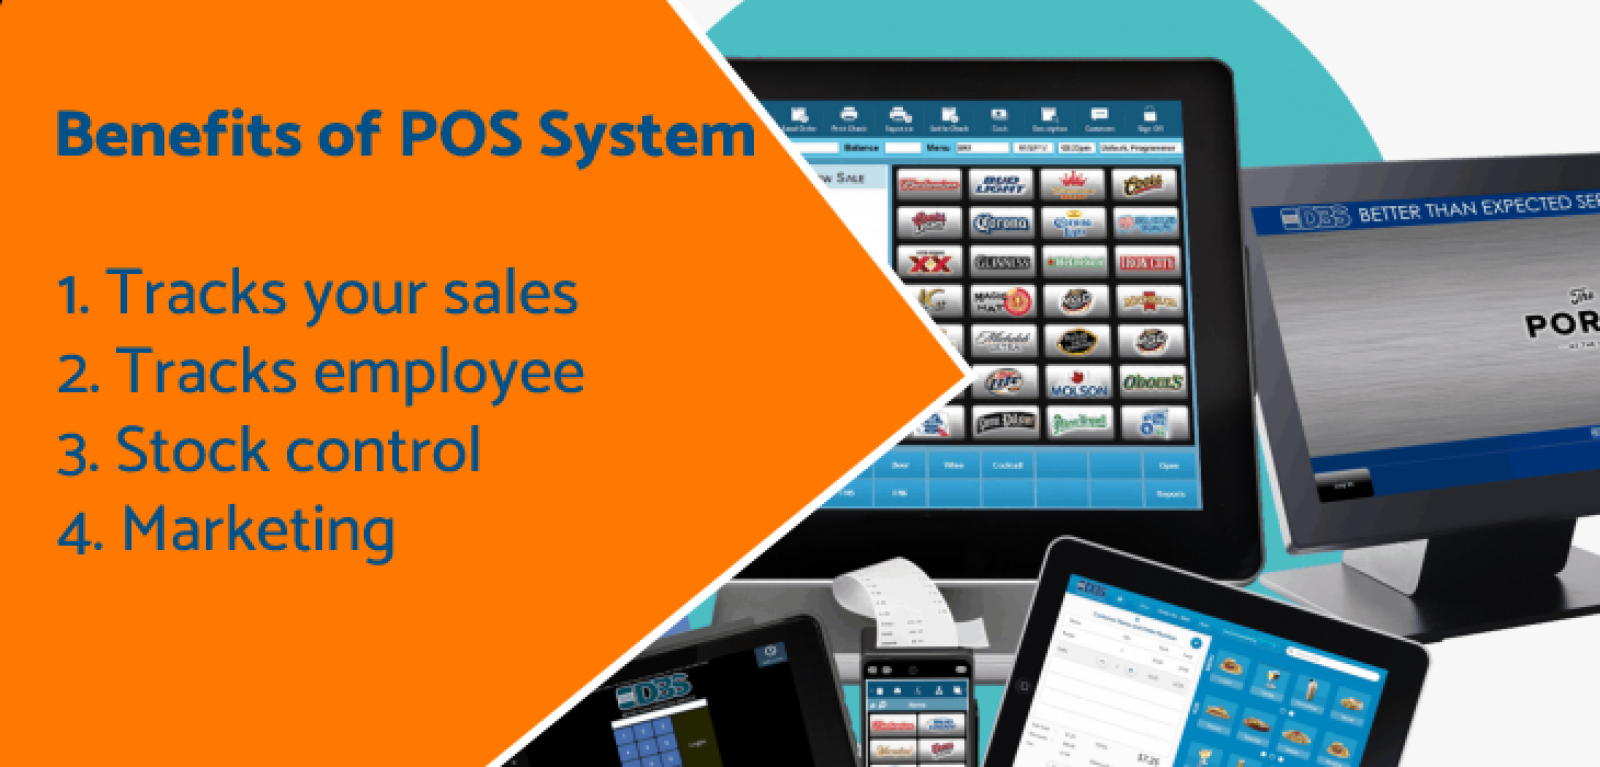 Benefits of POS system